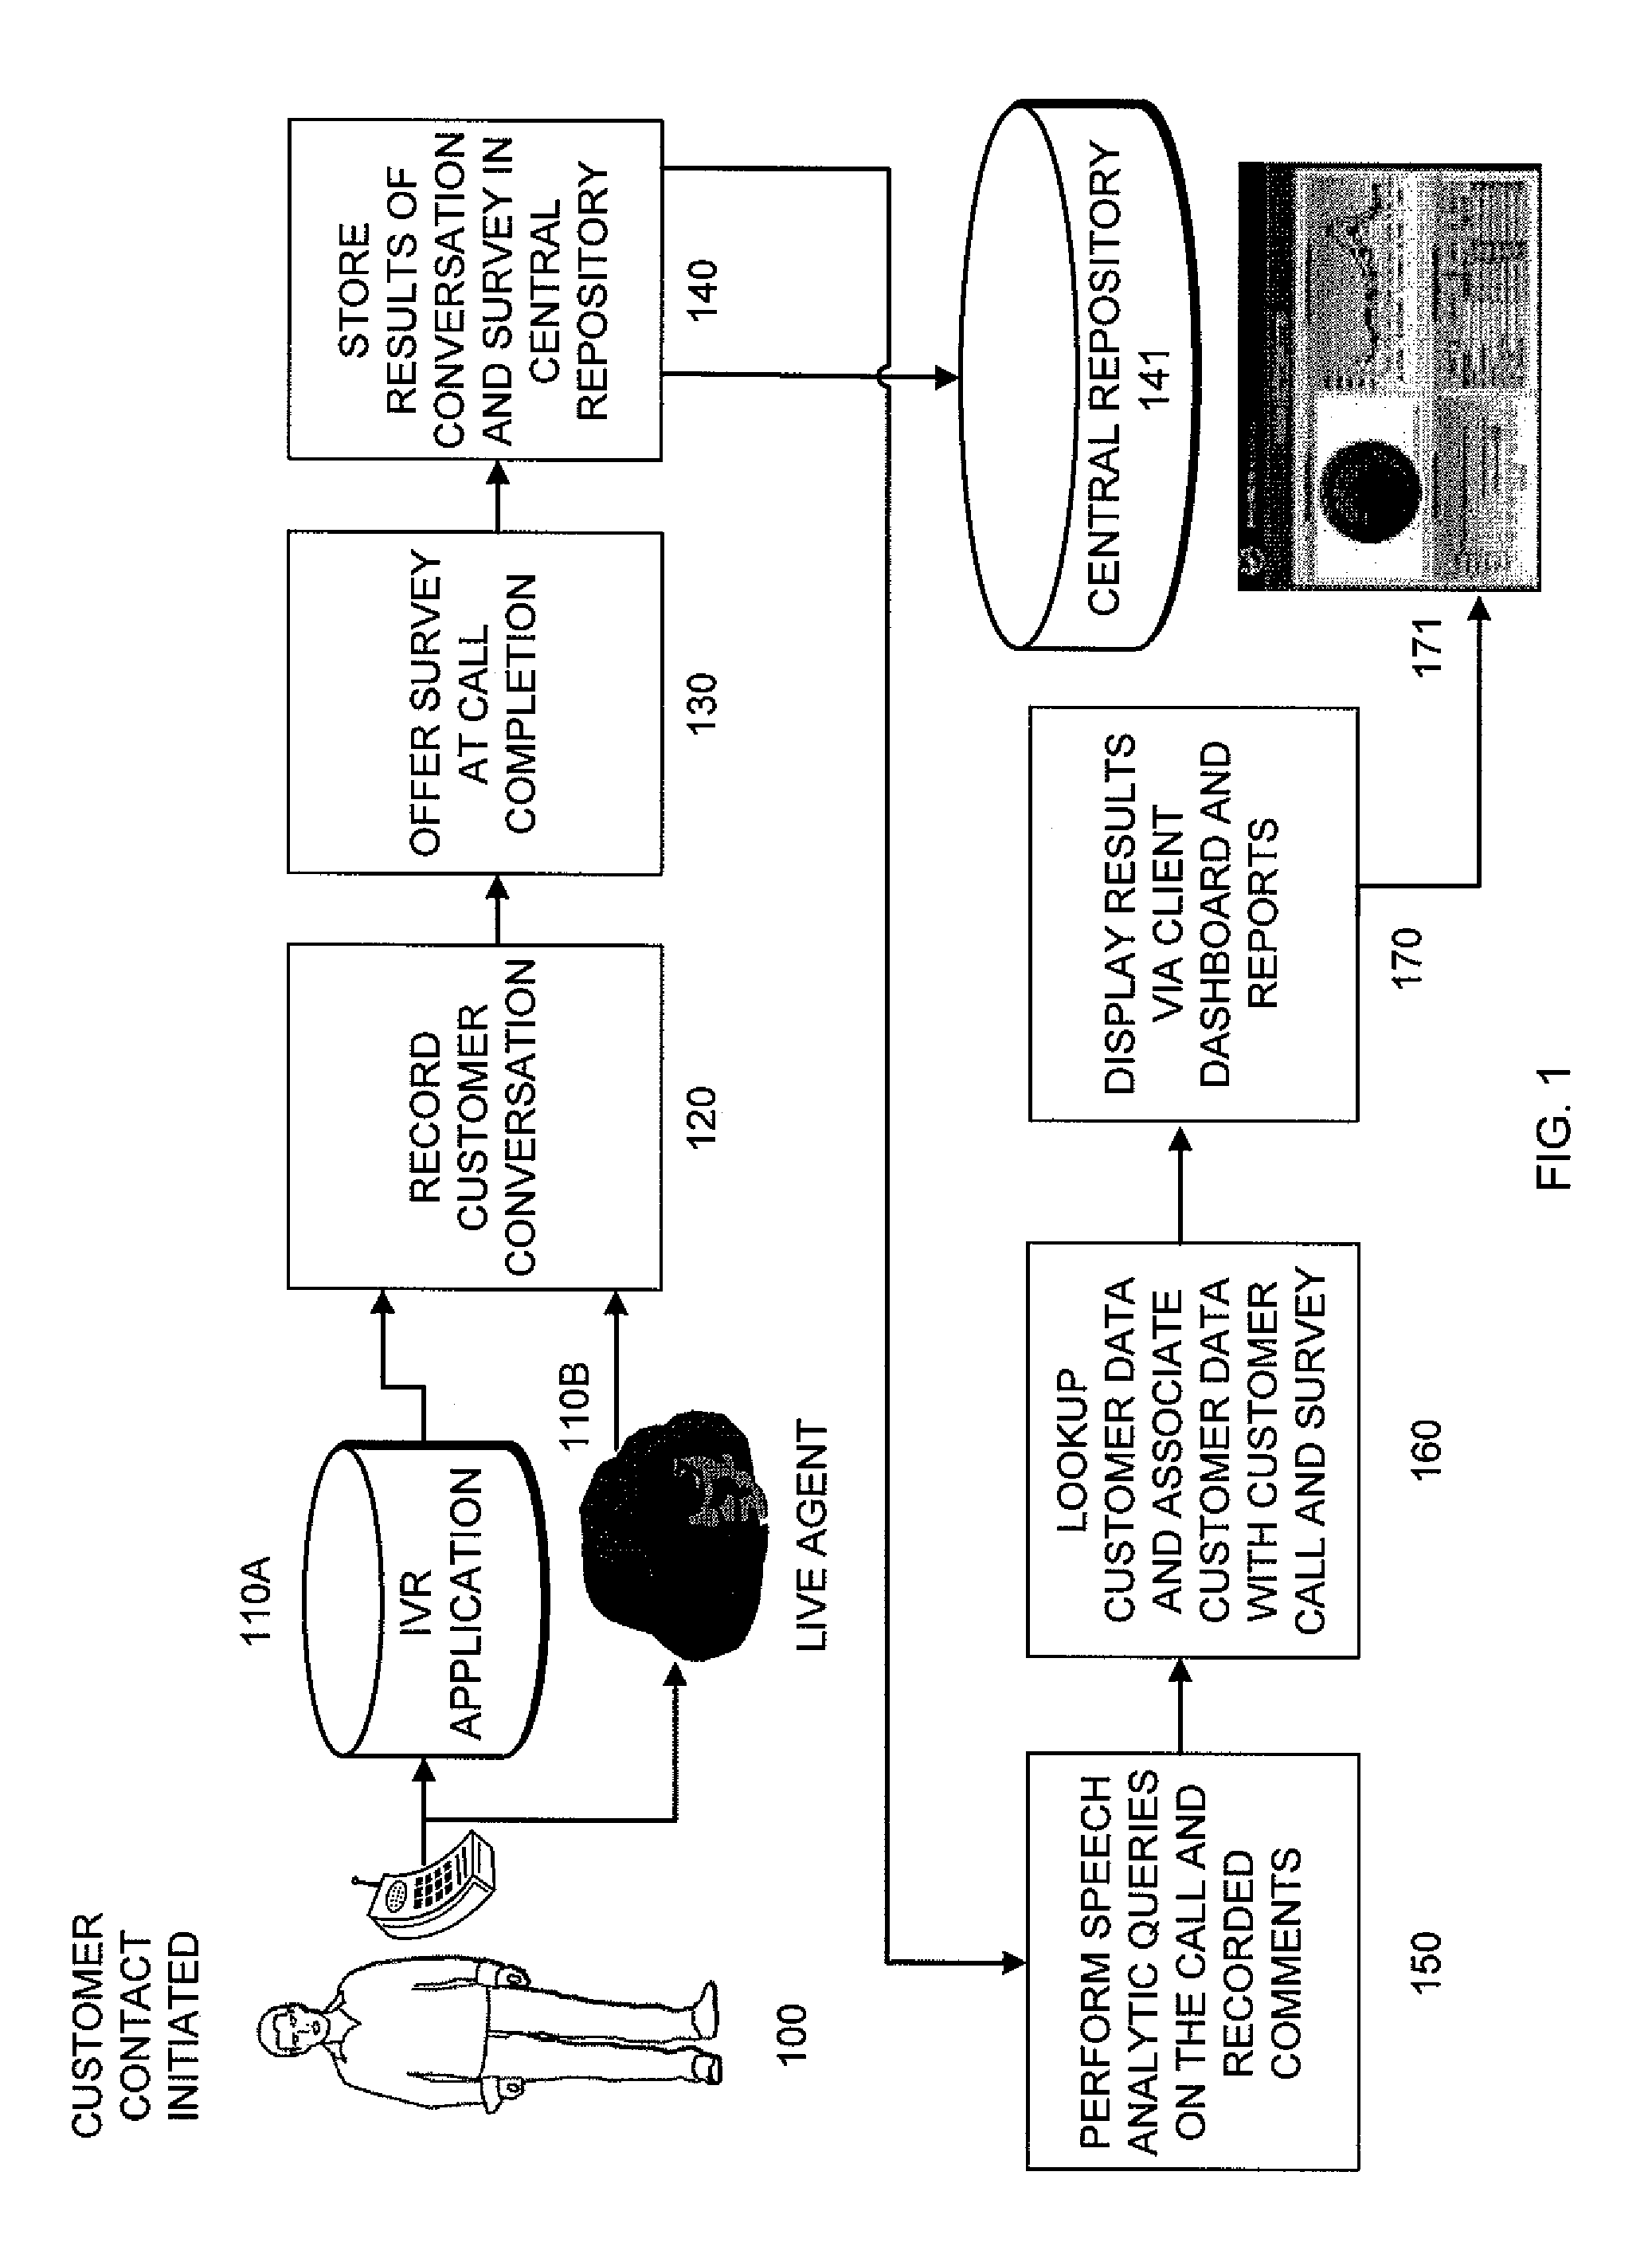 Method and apparatus of analyzing customer call data and related call information to determine call characteristics